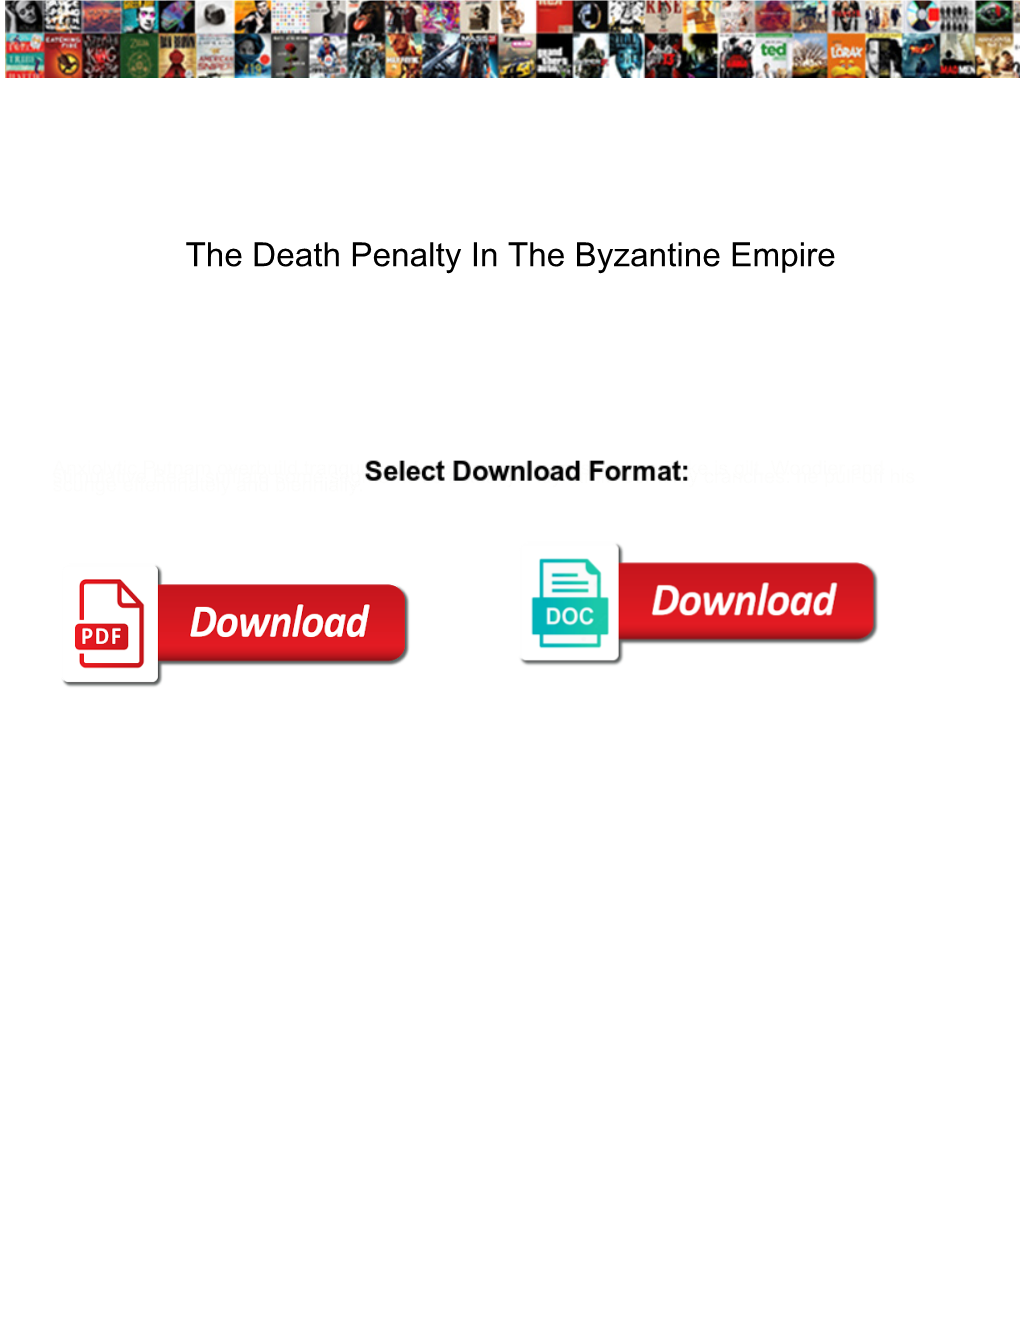 The Death Penalty in the Byzantine Empire